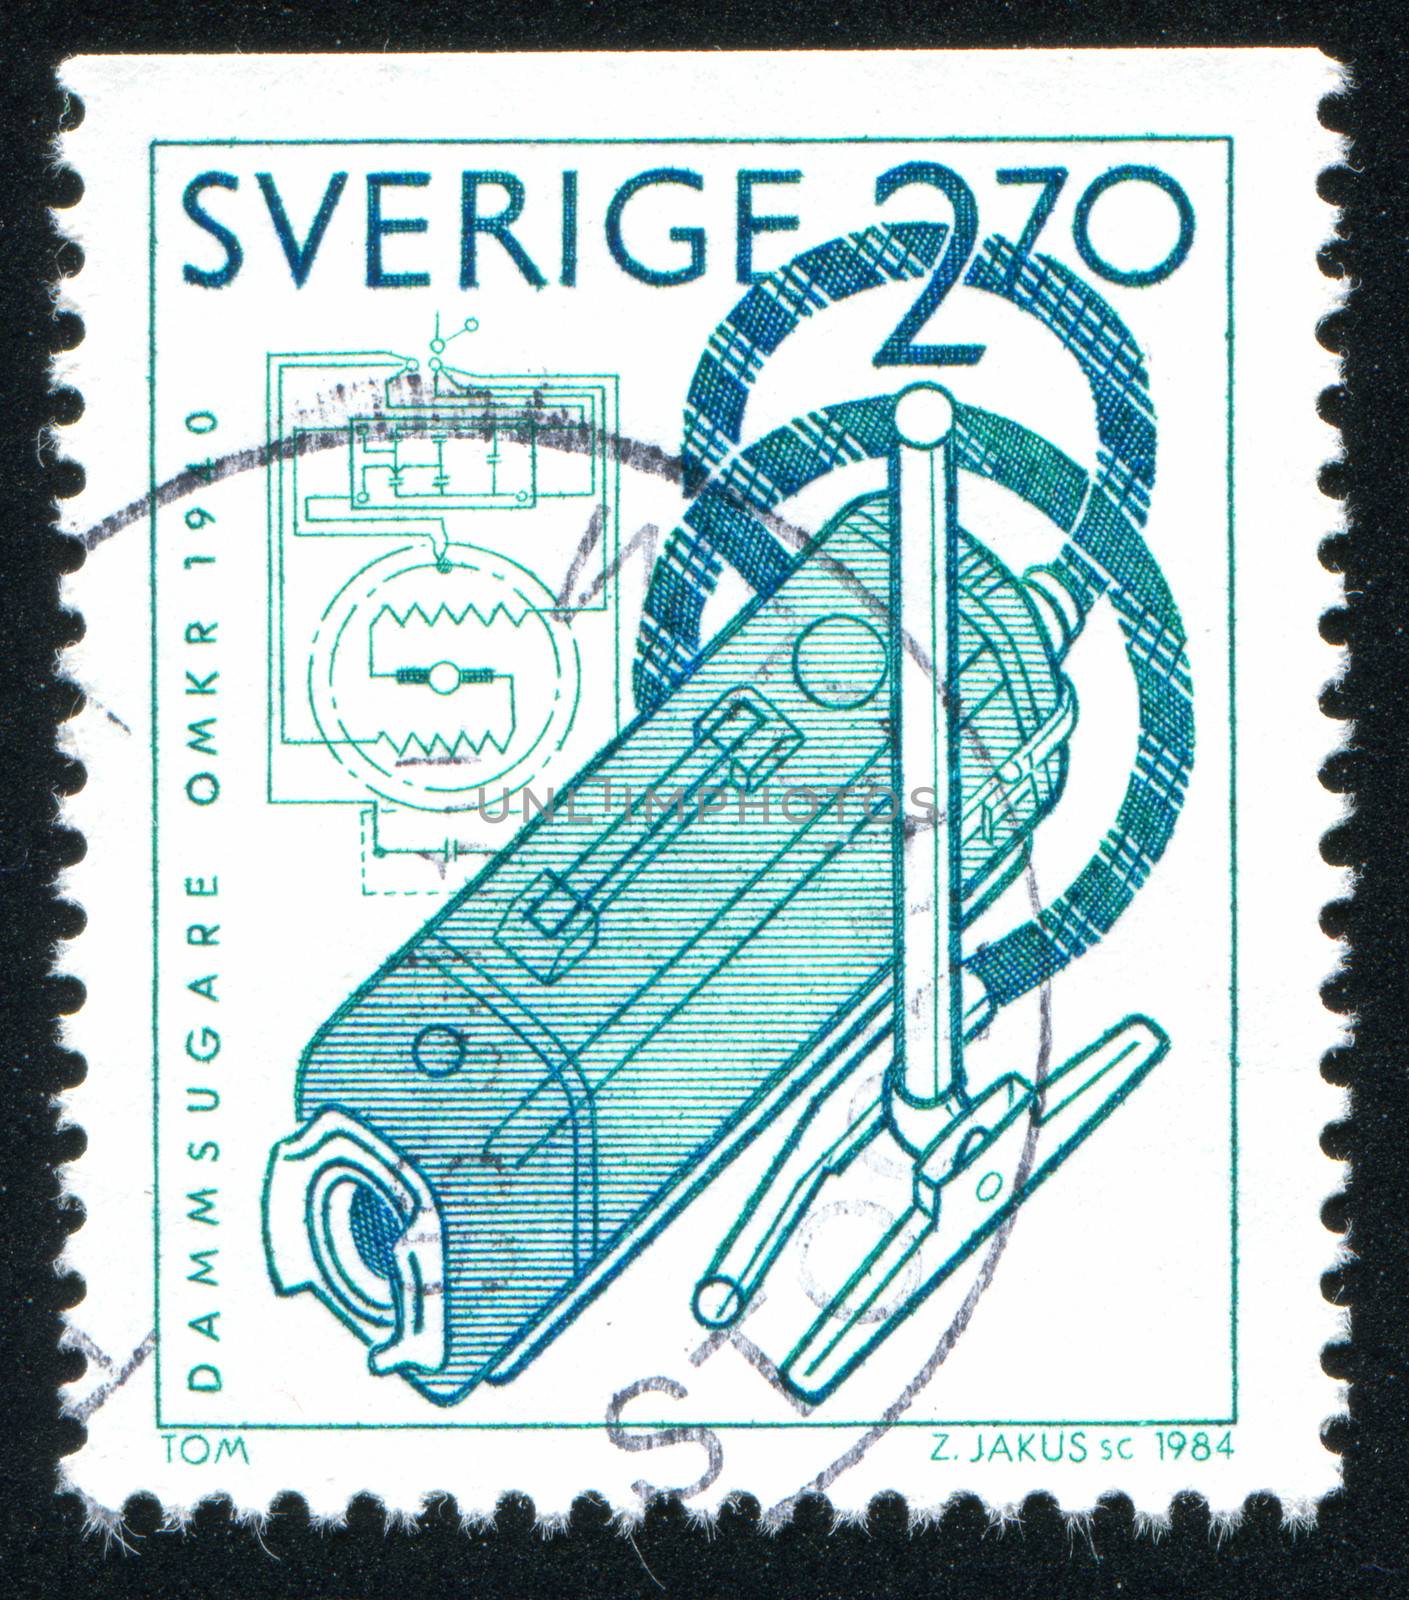 SWEDEN - CIRCA 1984: stamp printed by Sweden, shows Fan suction vacuum cleaner, Axel Wennergren, circa 1984